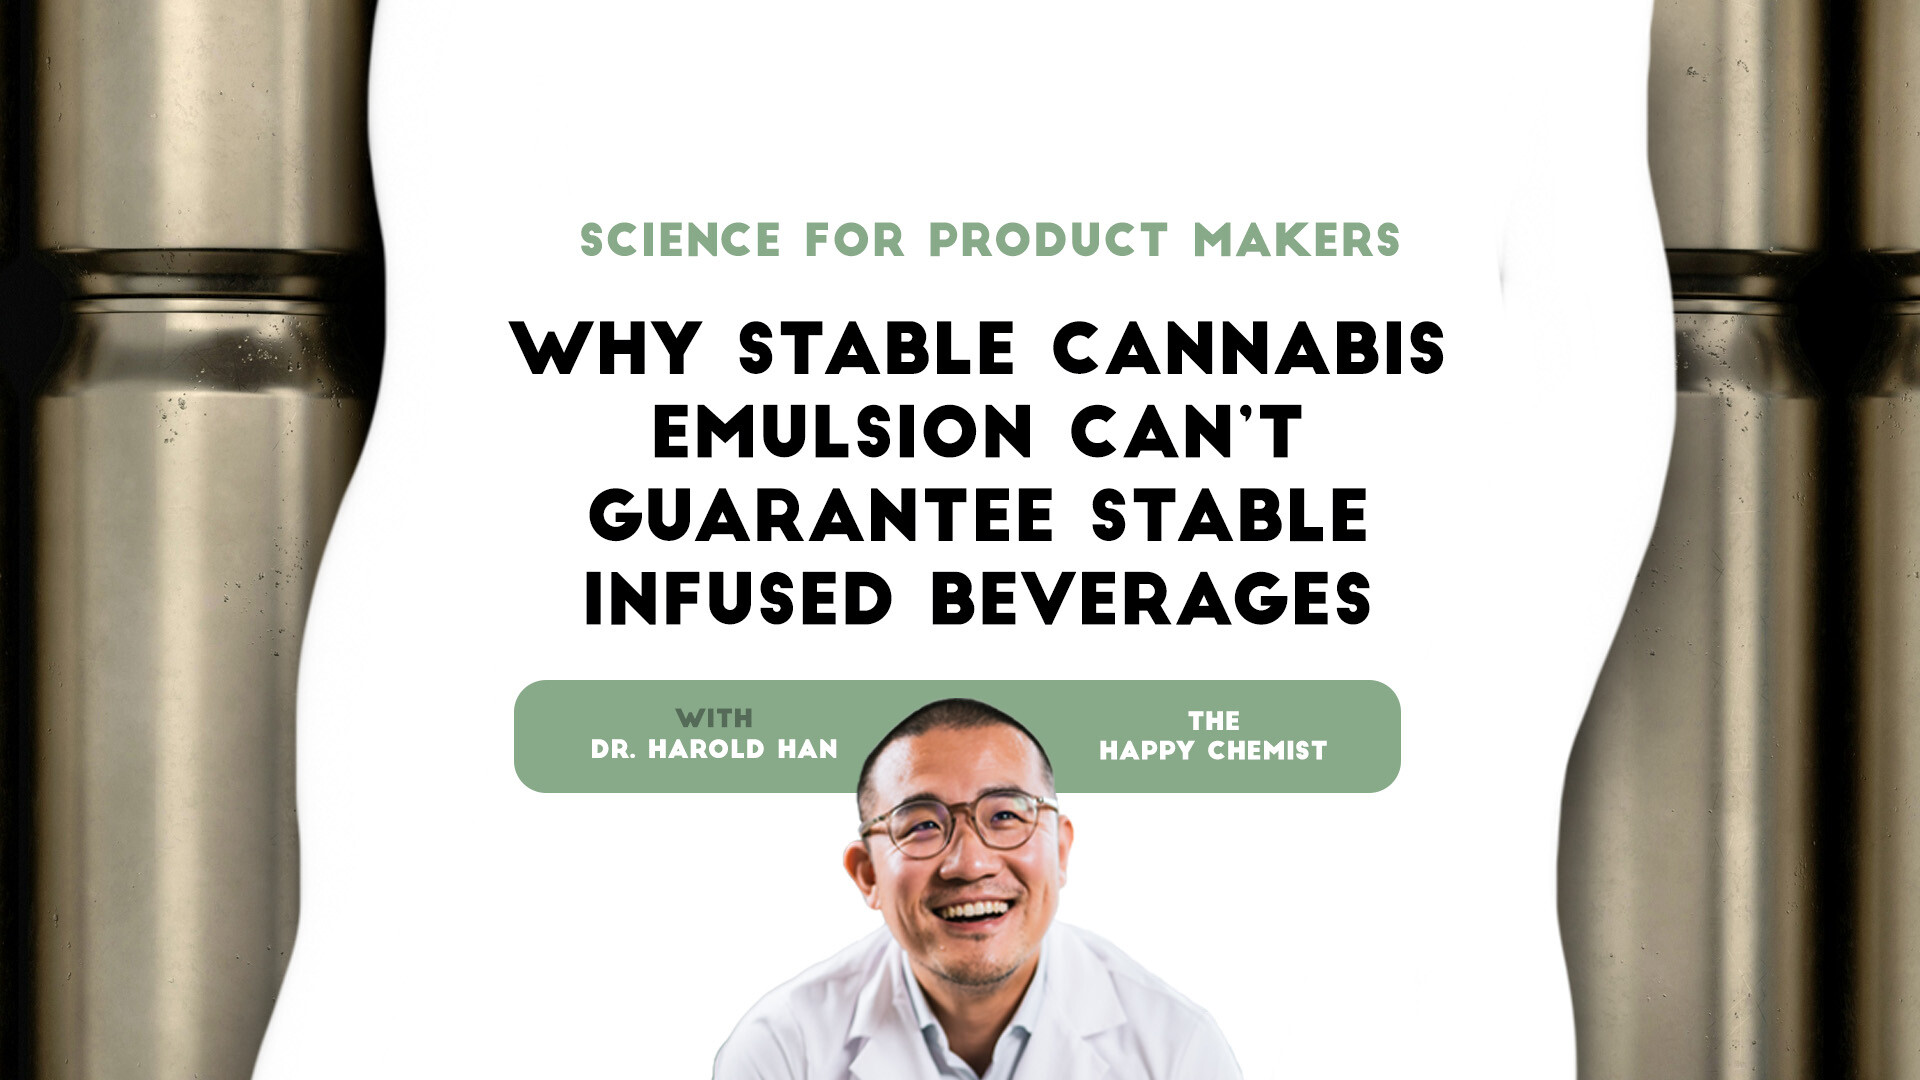 Science for product makers: Why stable cannabis emulsion can’t guarantee stable infused beverages